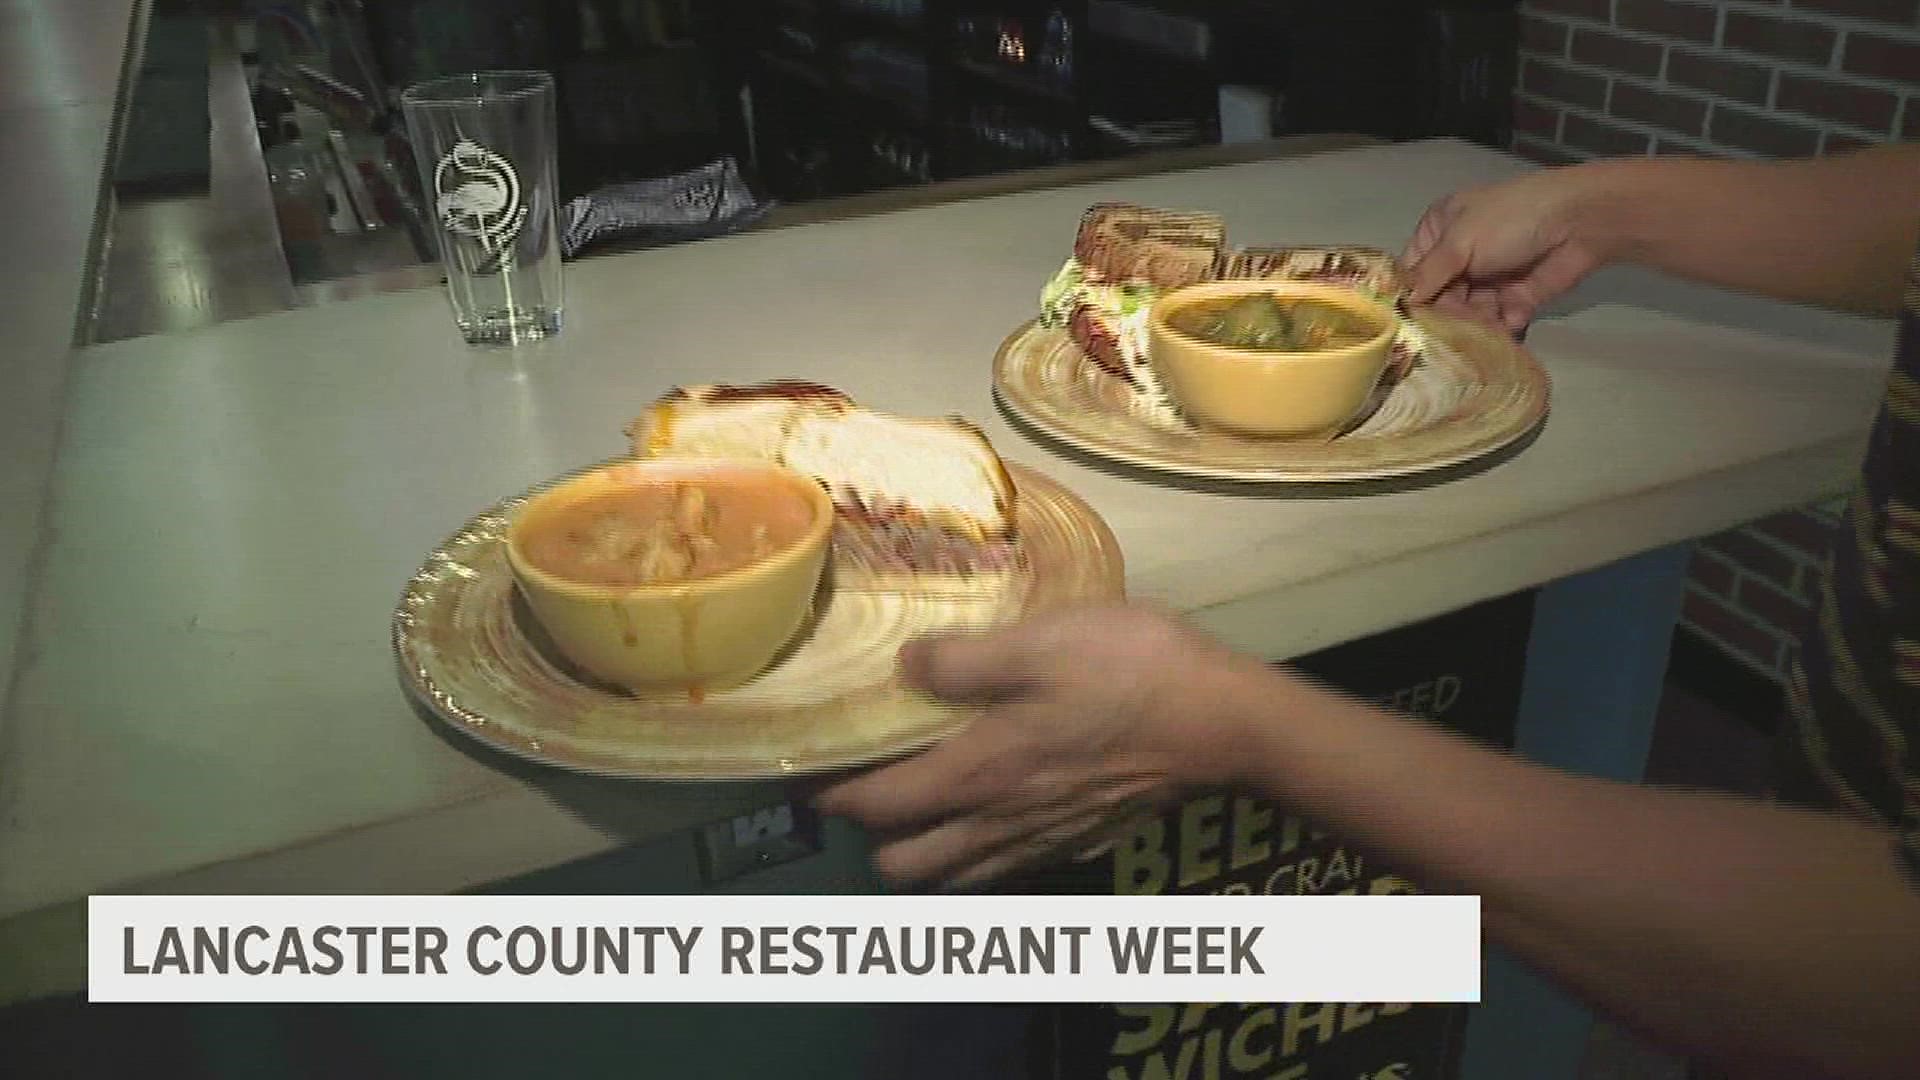 The weeks features restaurants around Lancaster County and benefits Lancaster Farmland Trust